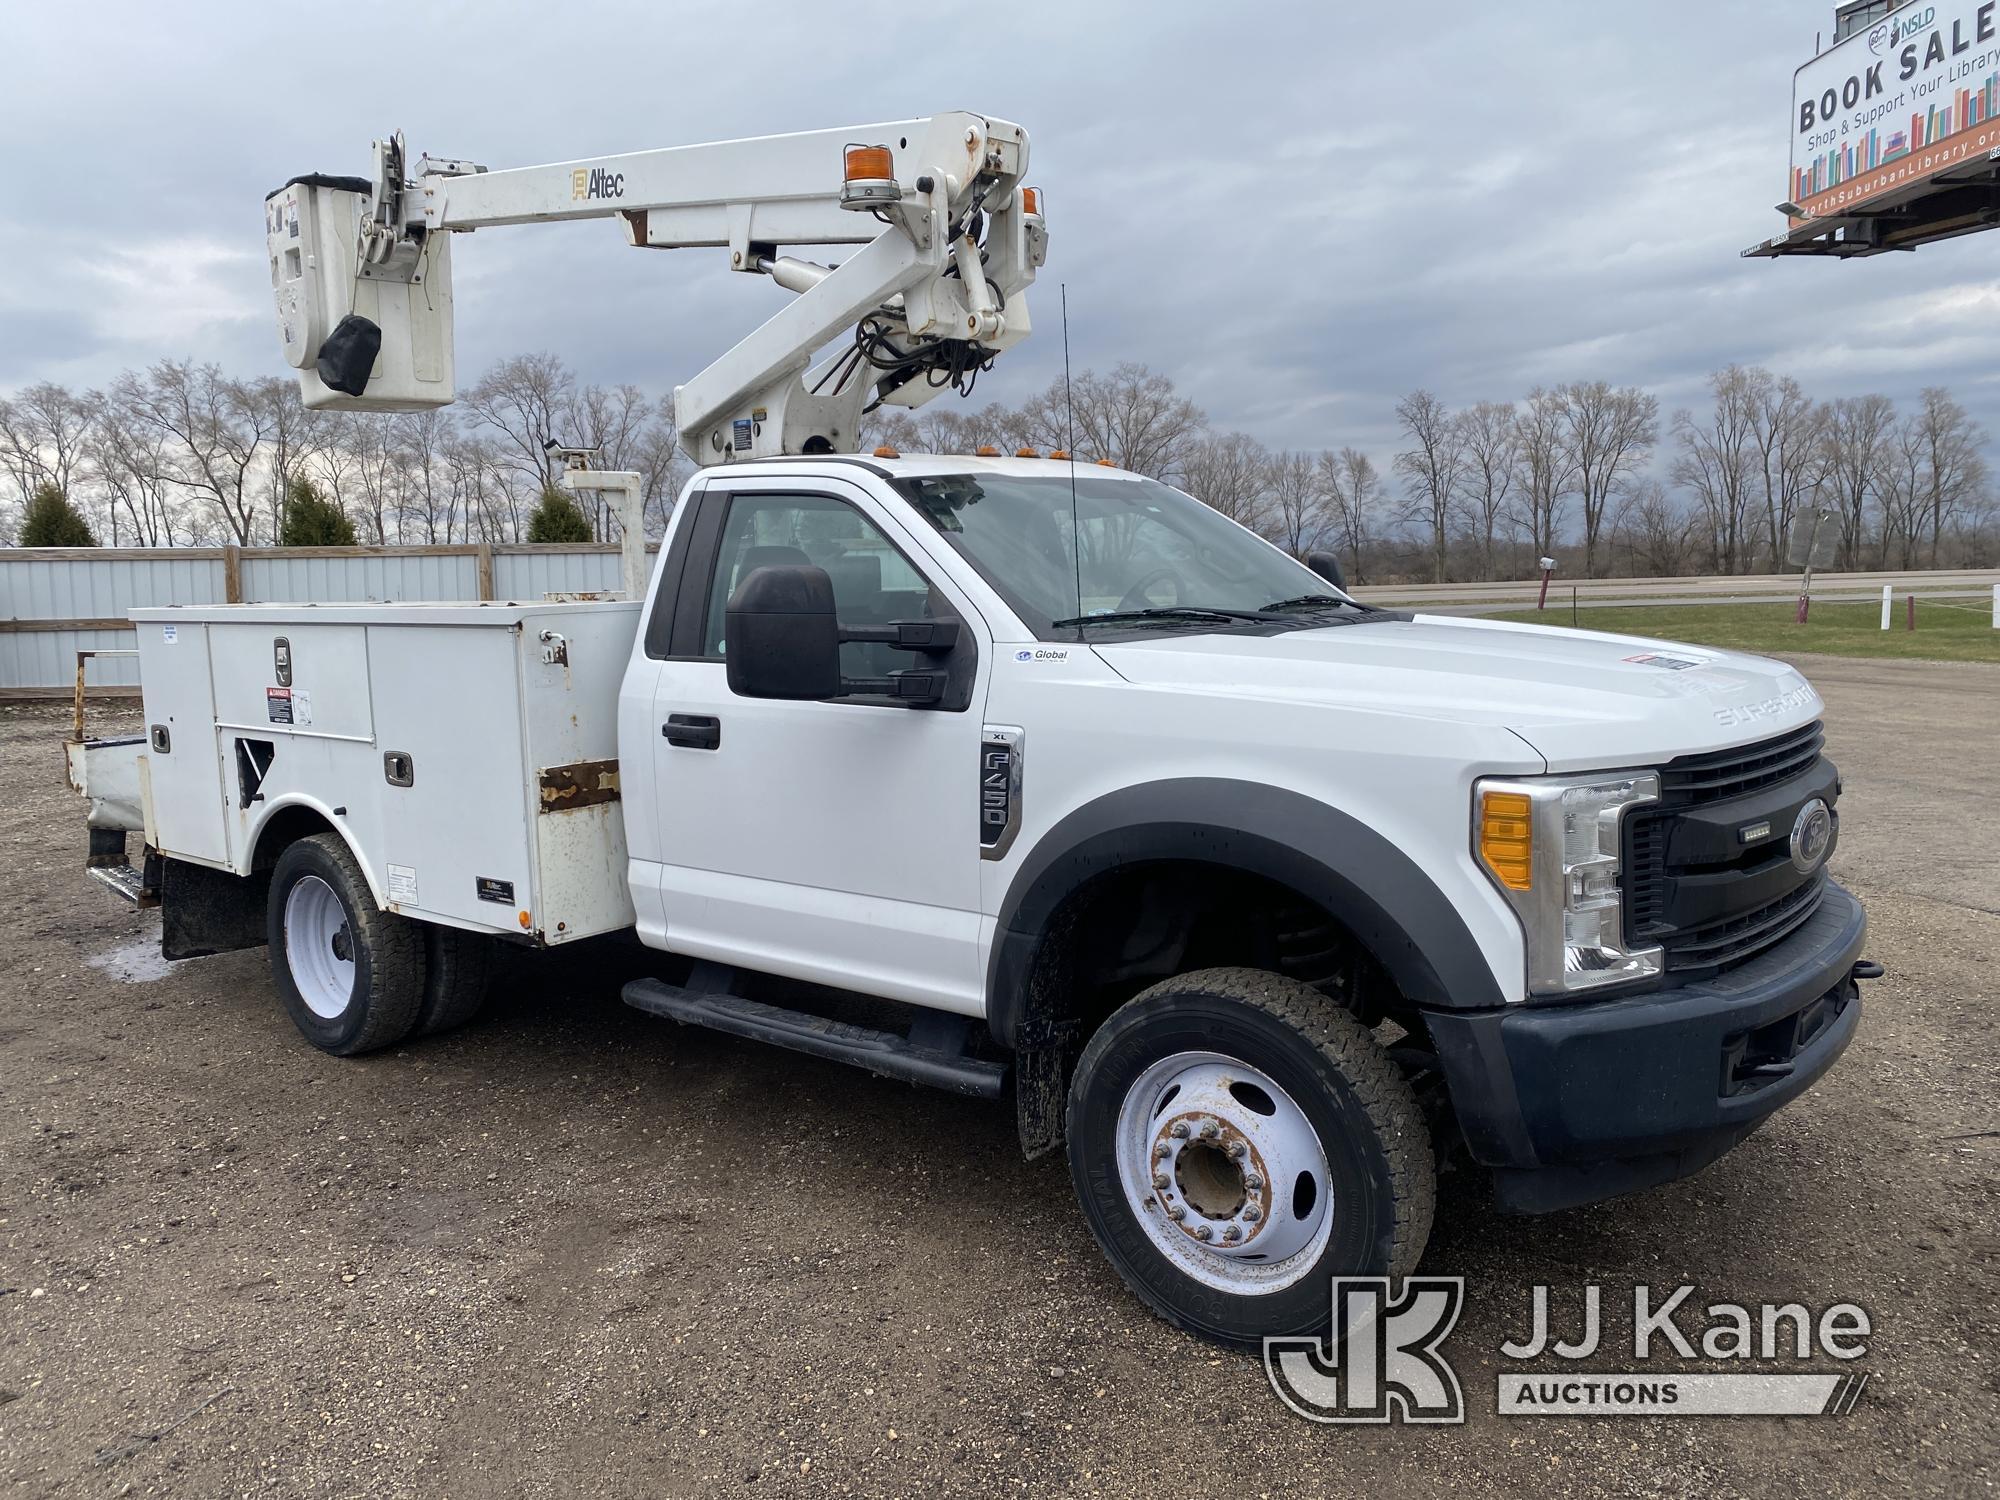 (South Beloit, IL) Altec AT200A, Telescopic Non-Insulated Bucket Truck mounted behind cab on 2017 Fo